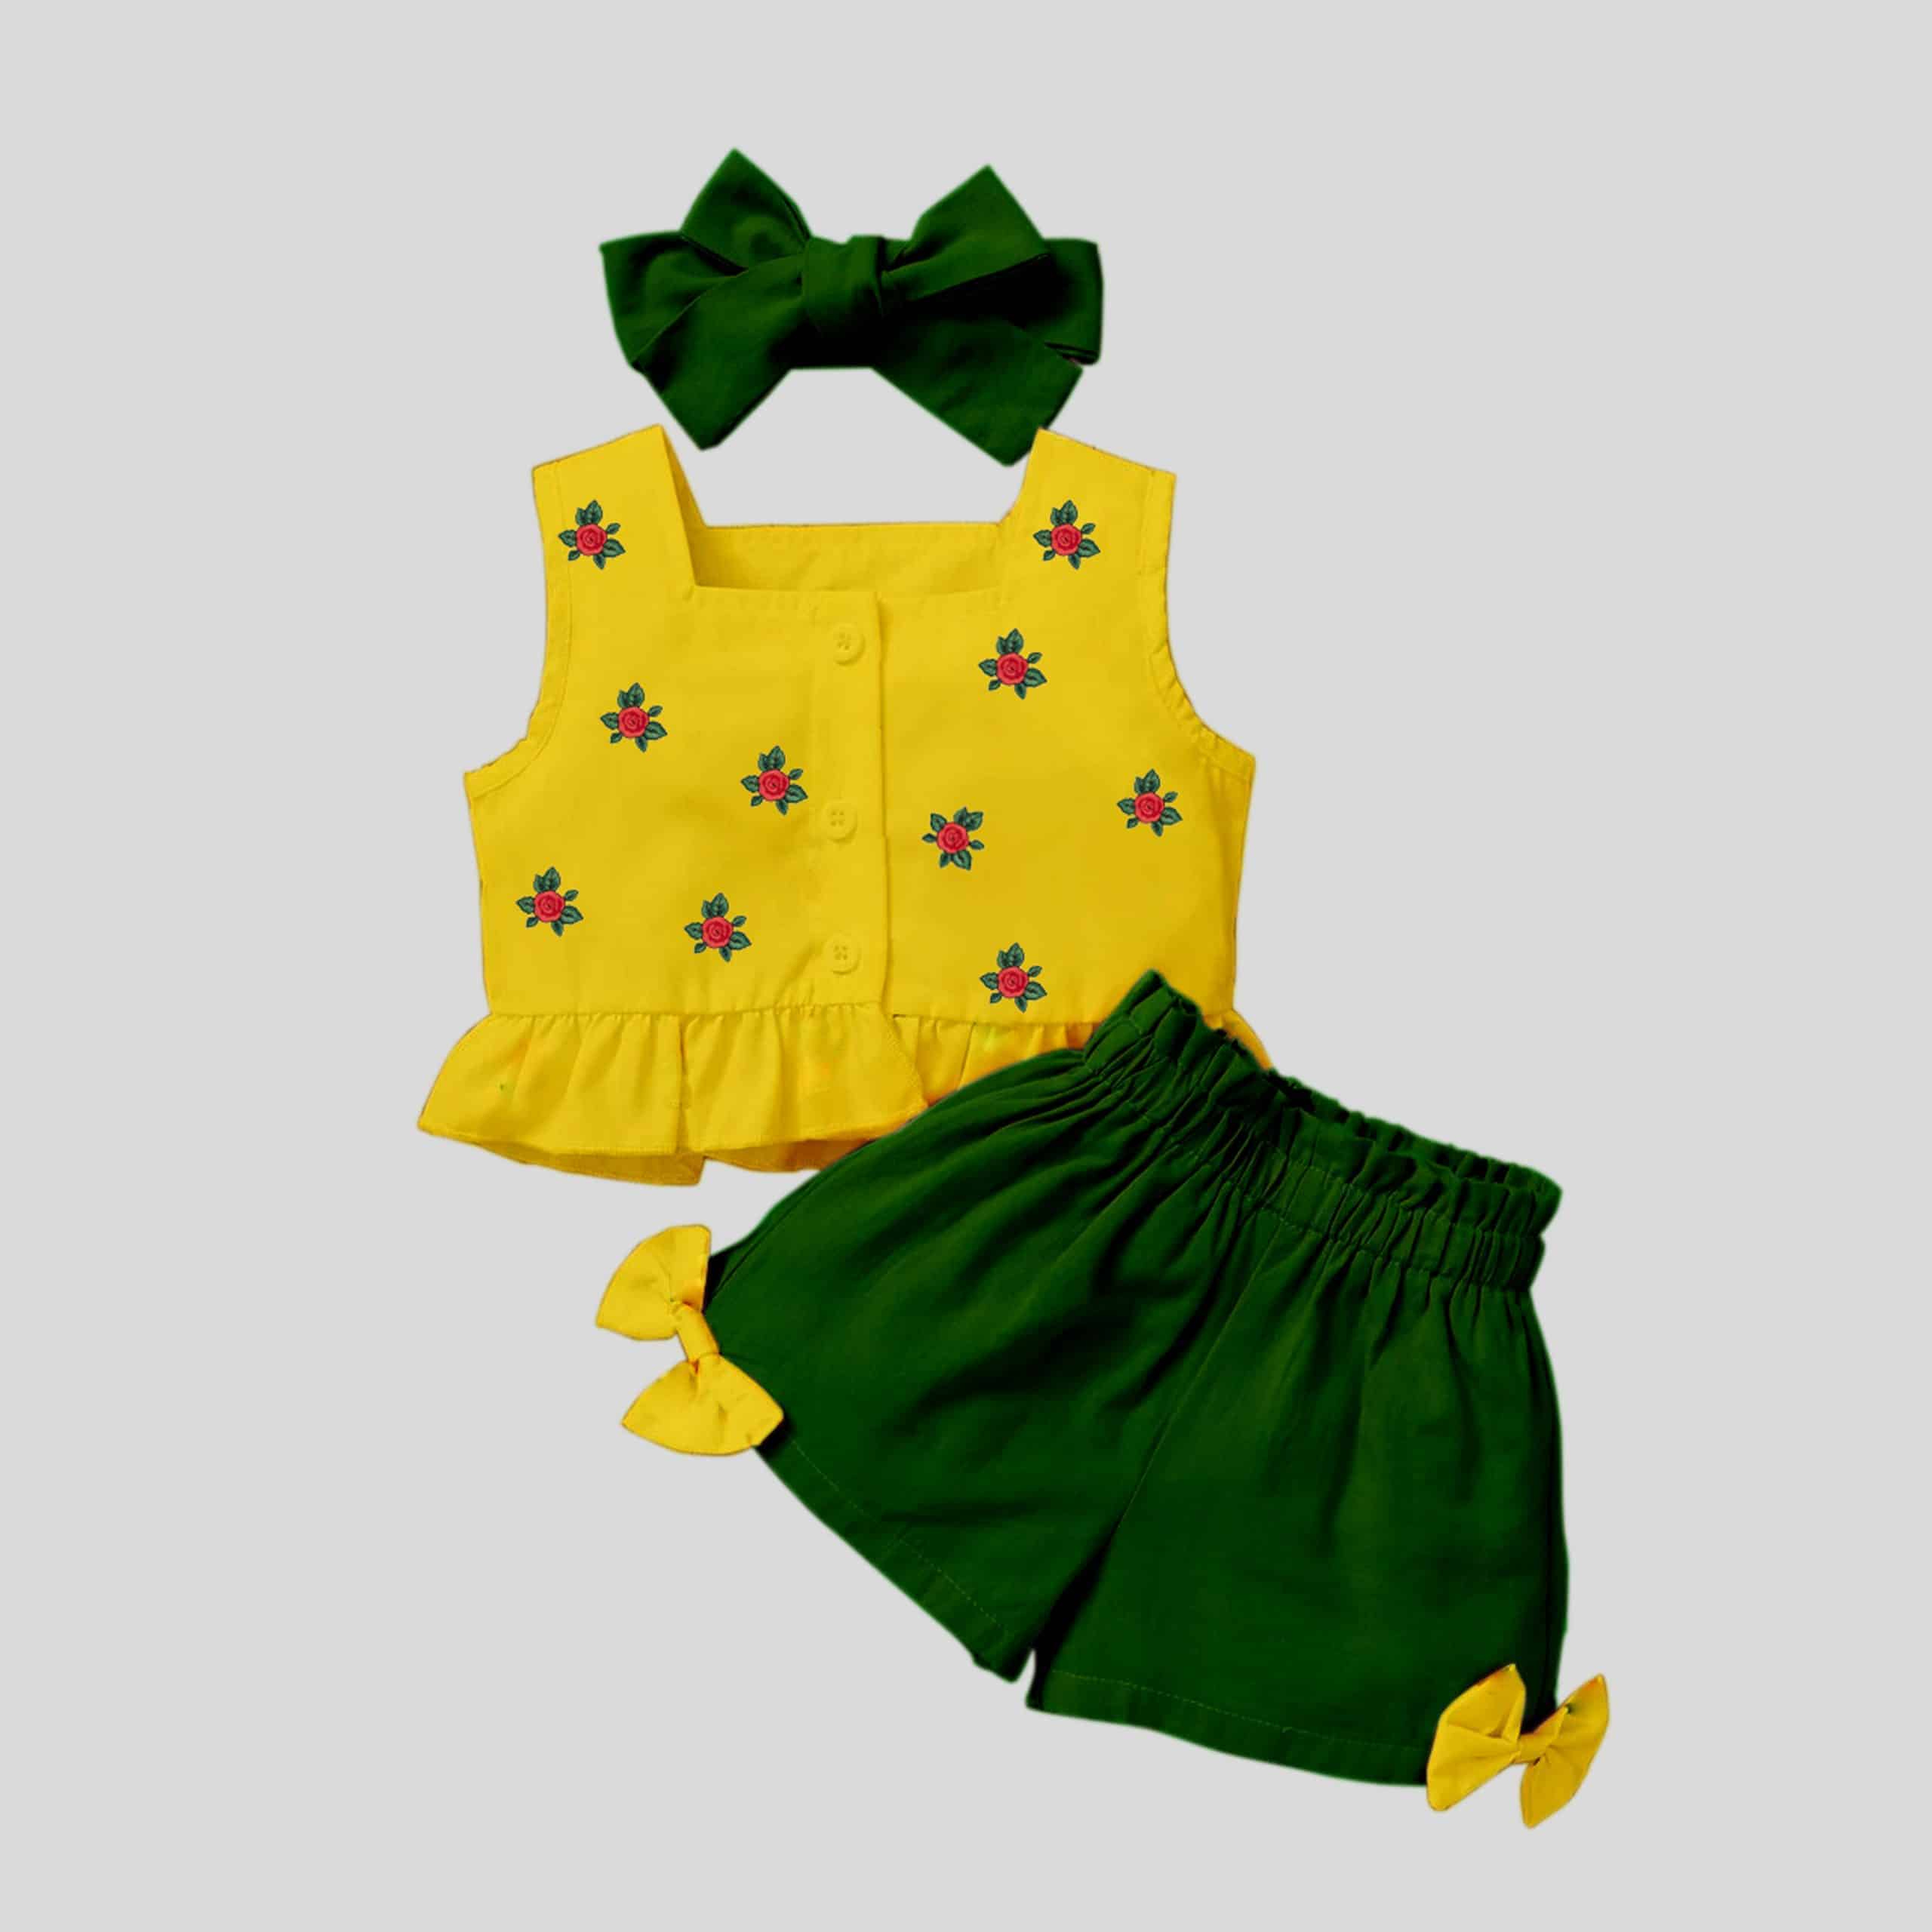 Girls yellow sleeveless top with floral print details, green shorts set and matching headband-RKFCW248